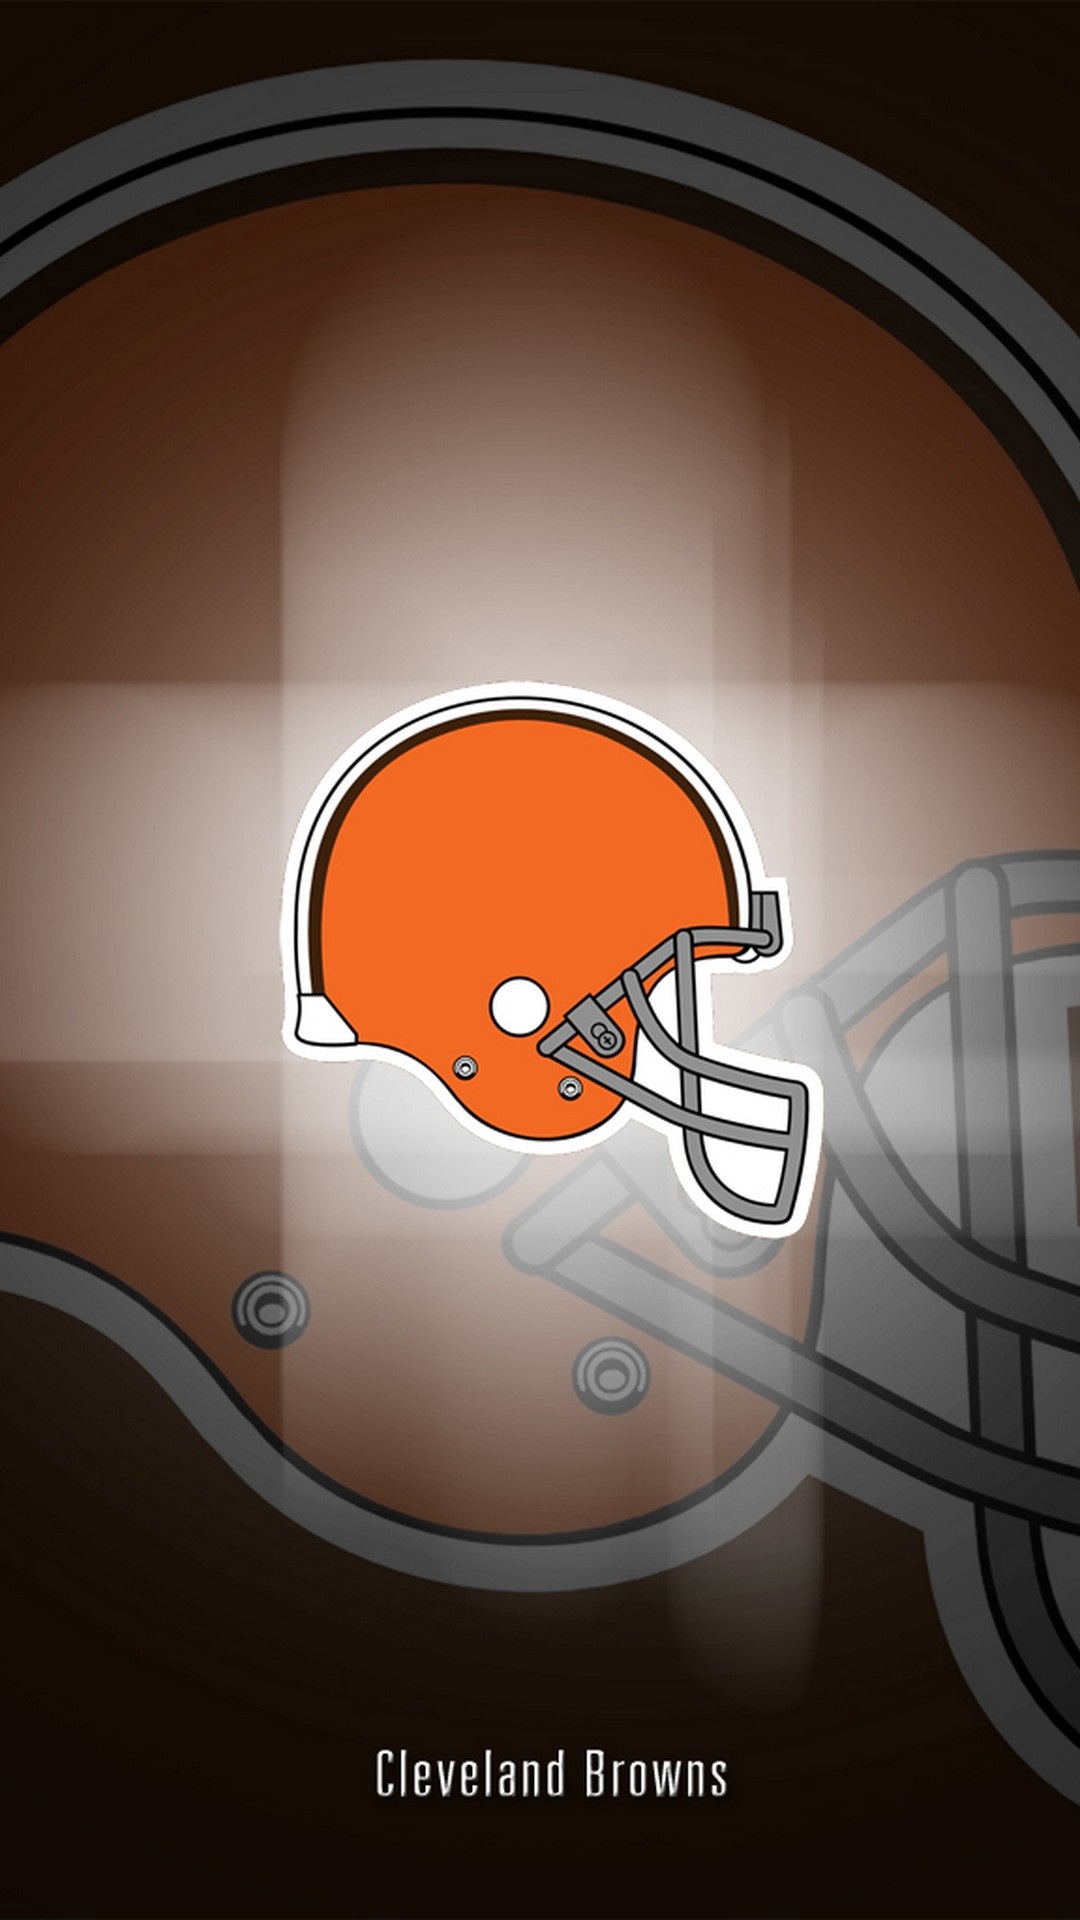 Cleveland Browns iPhone Wallpaper Home Screen with high-resolution 1080x1920 pixel. Download and set as wallpaper for Apple iPhone X, XS Max, XR, 8, 7, 6, SE, iPad, Android